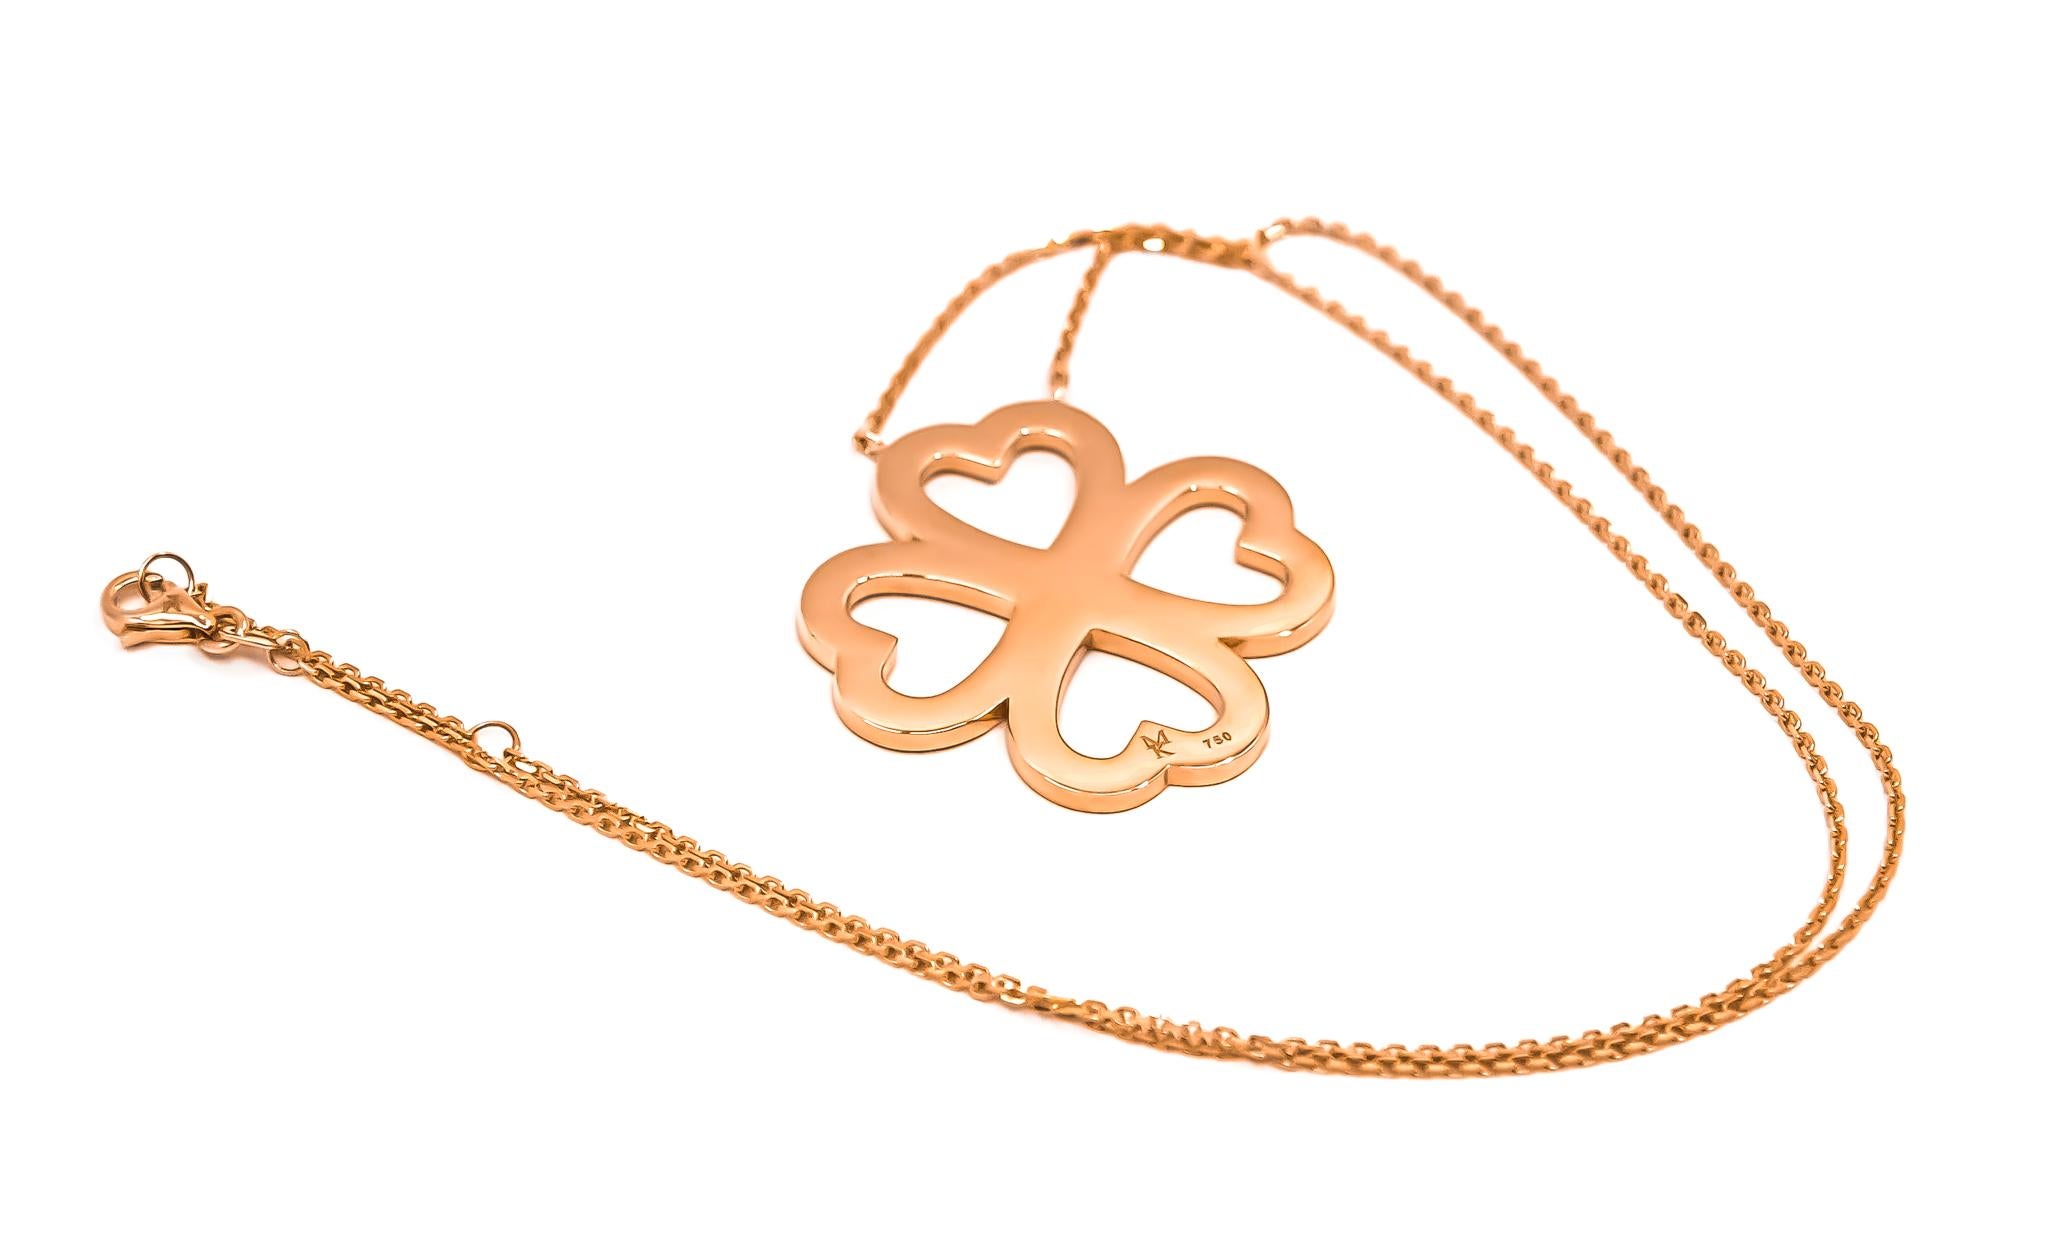 Romantic Heart Blossom Pendant Necklace in 18kt Rose Gold For Sale